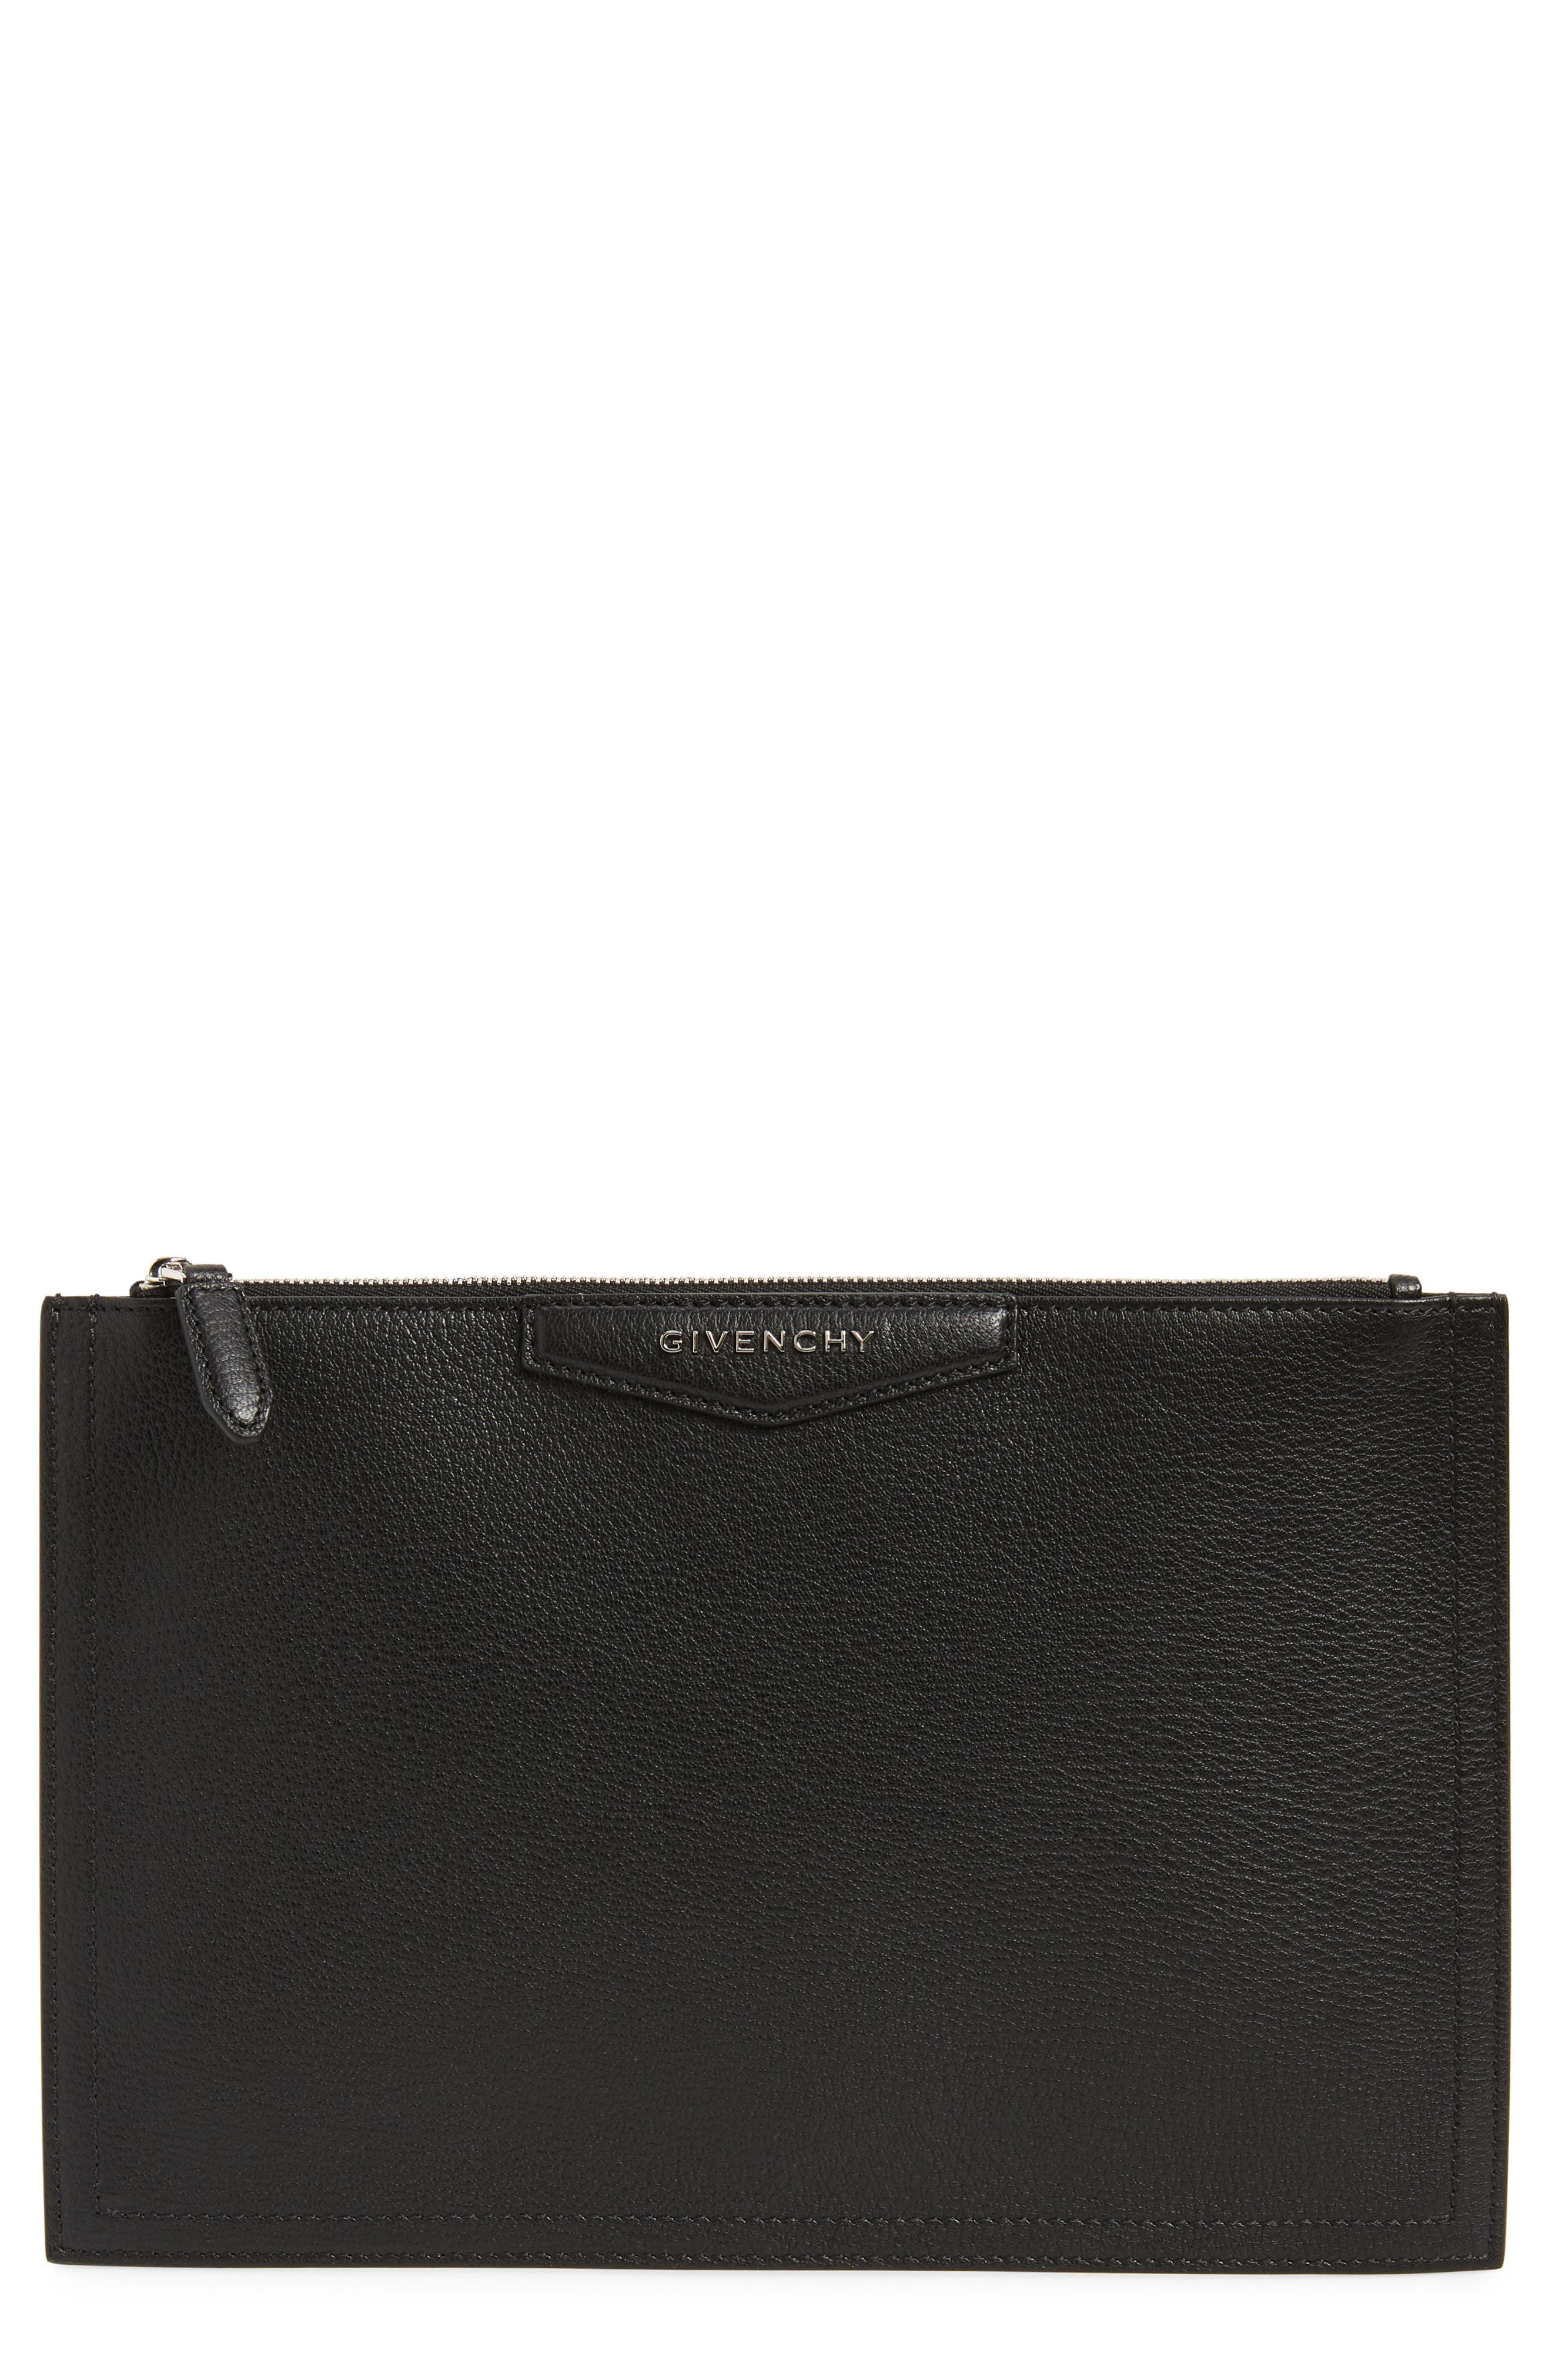 givenchy pouch mens